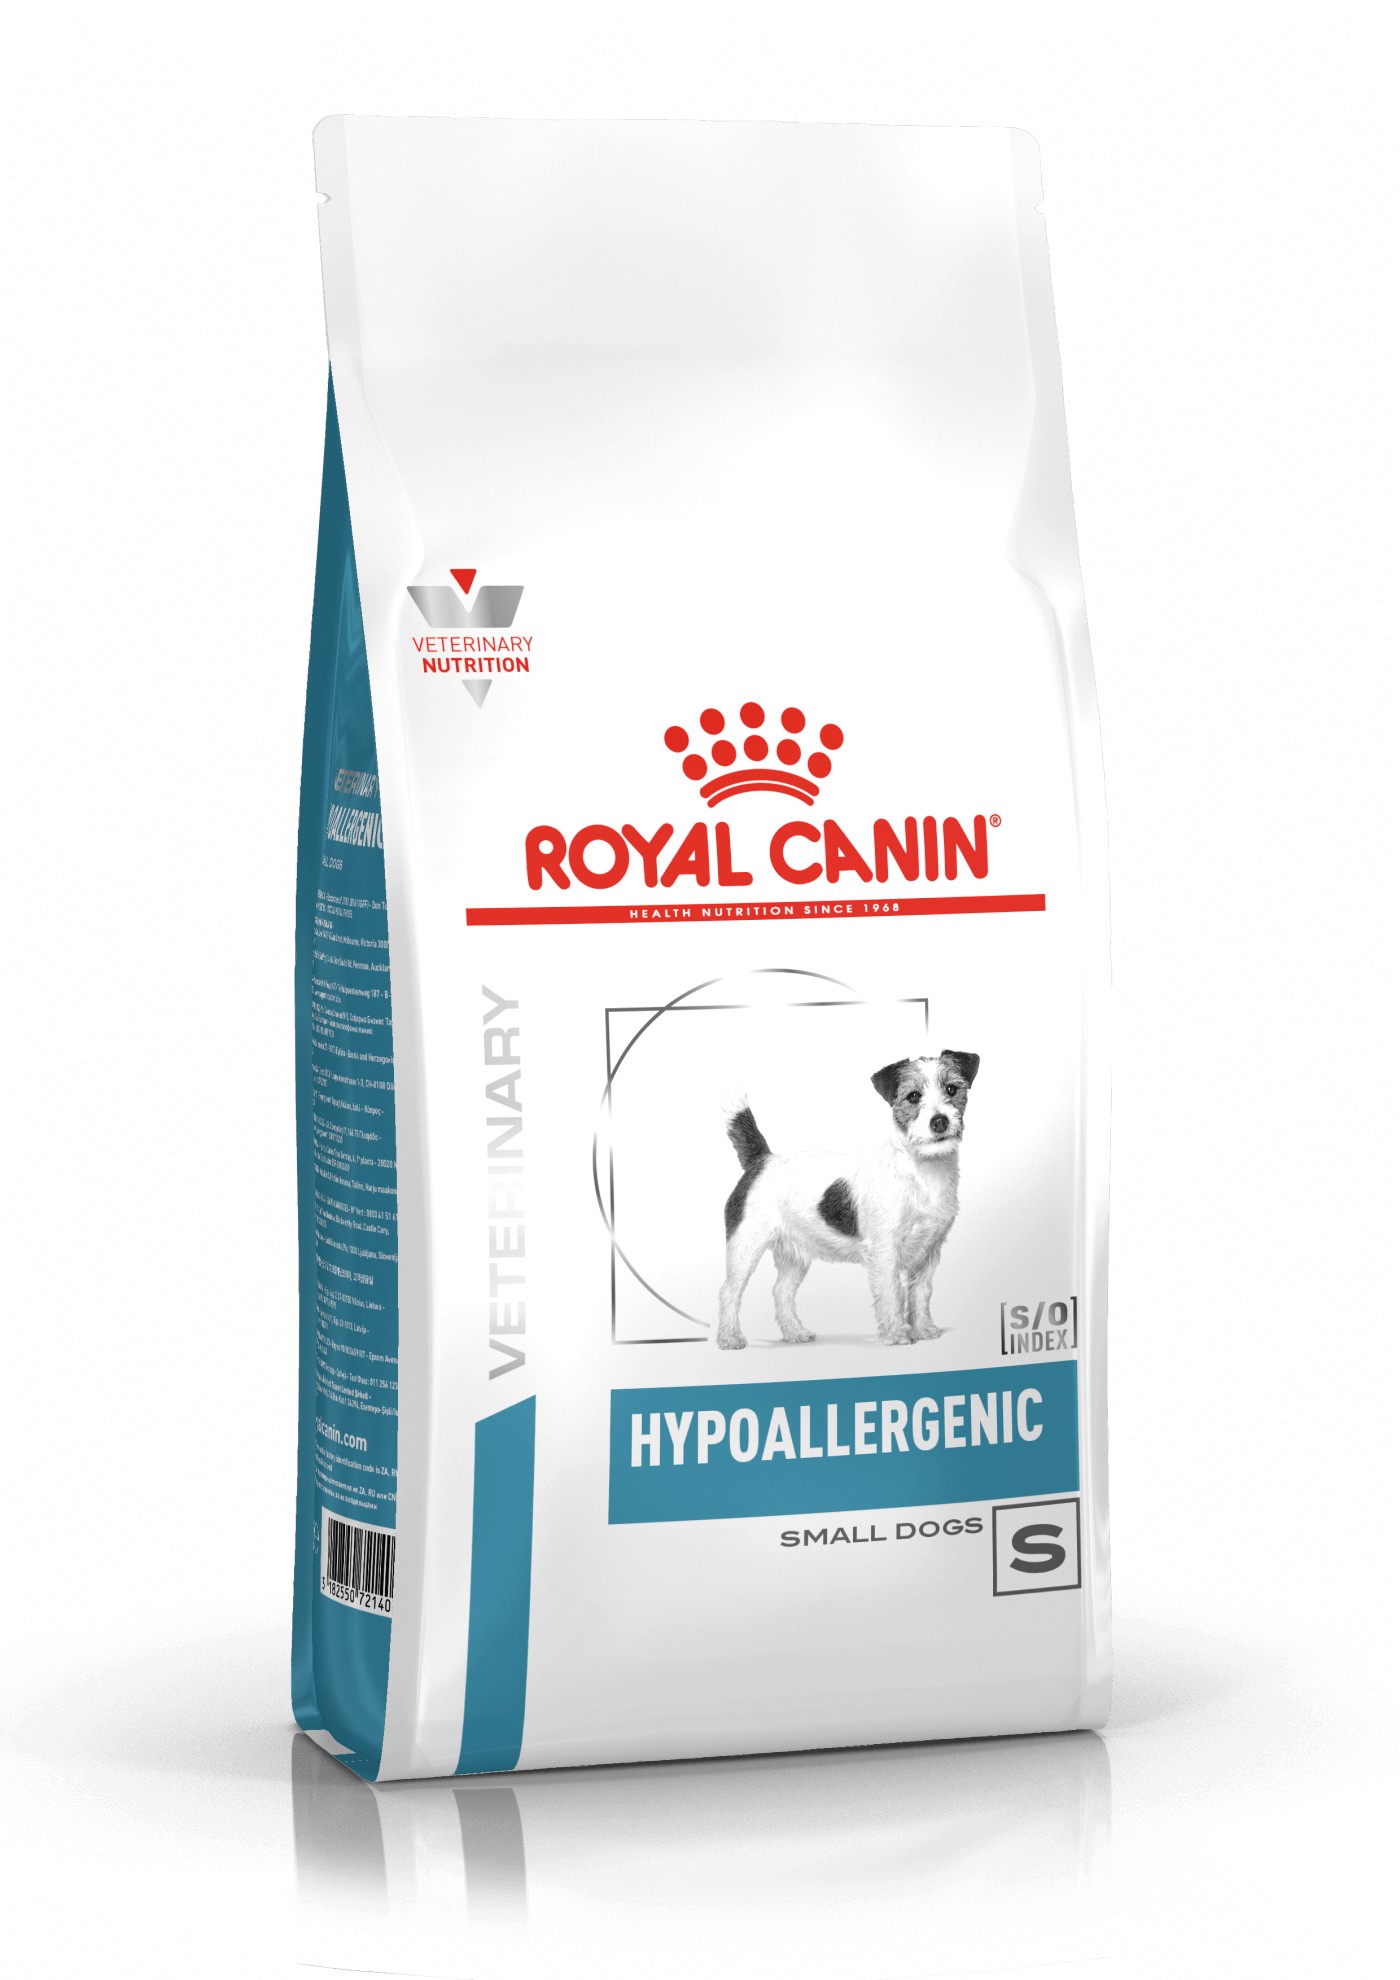 Royal Canin Veterinary Hypoallergenic Small Dogs pour chien